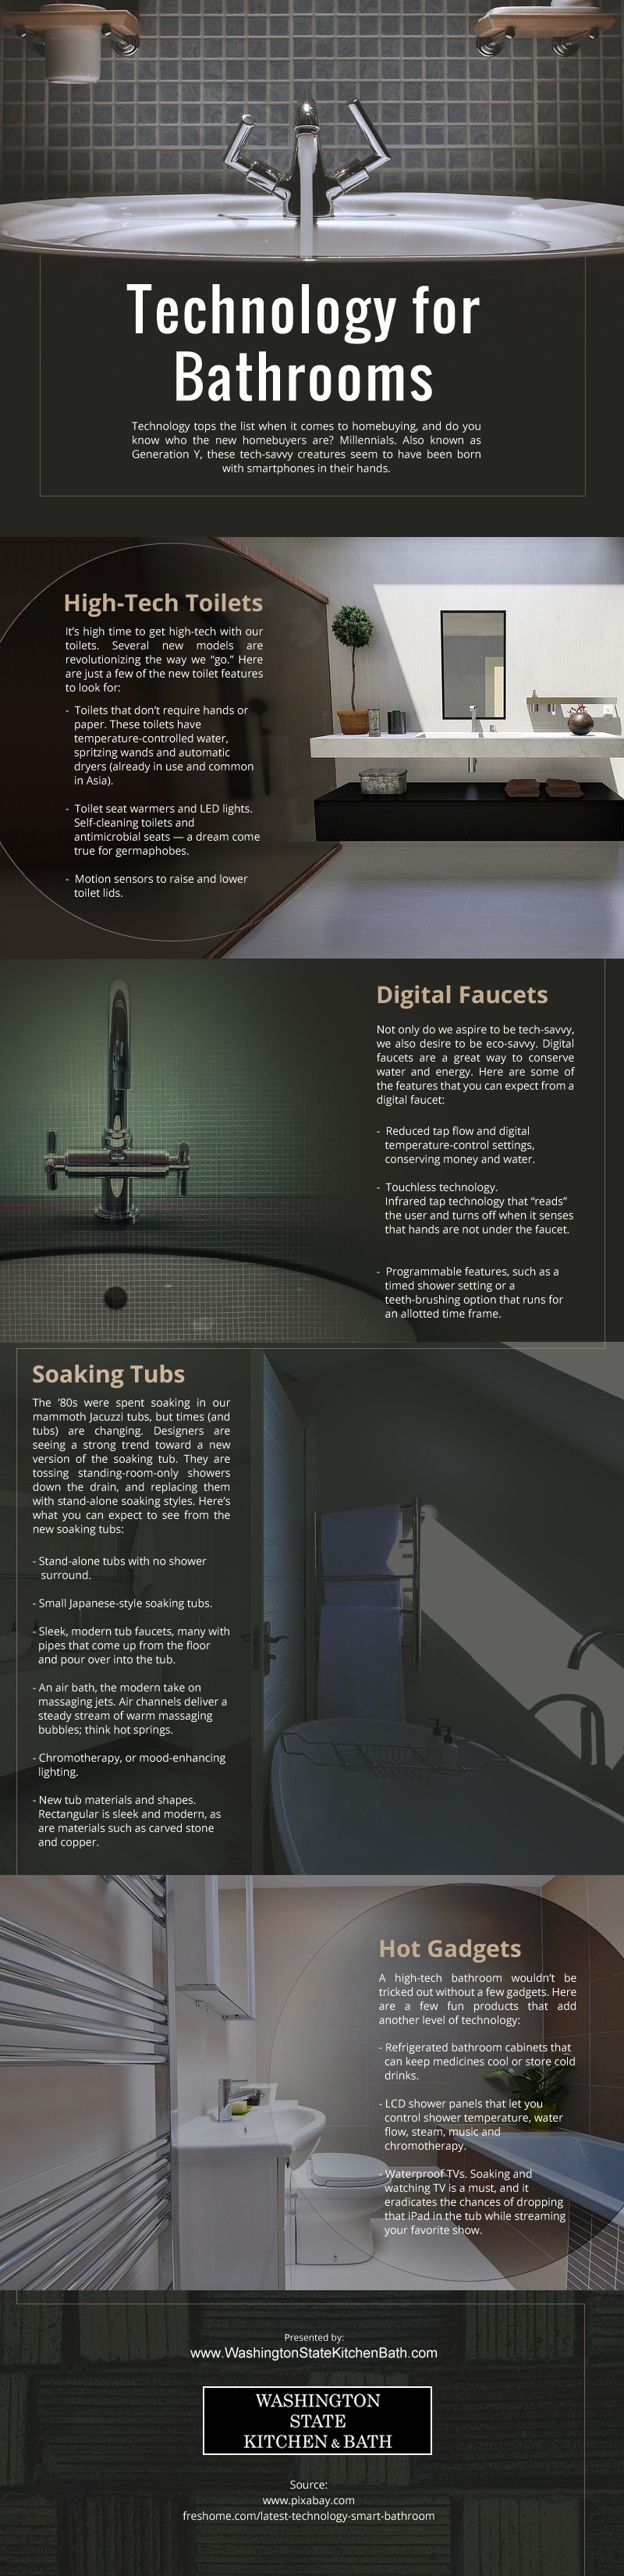 Technology-for-Bathrooms Infographic